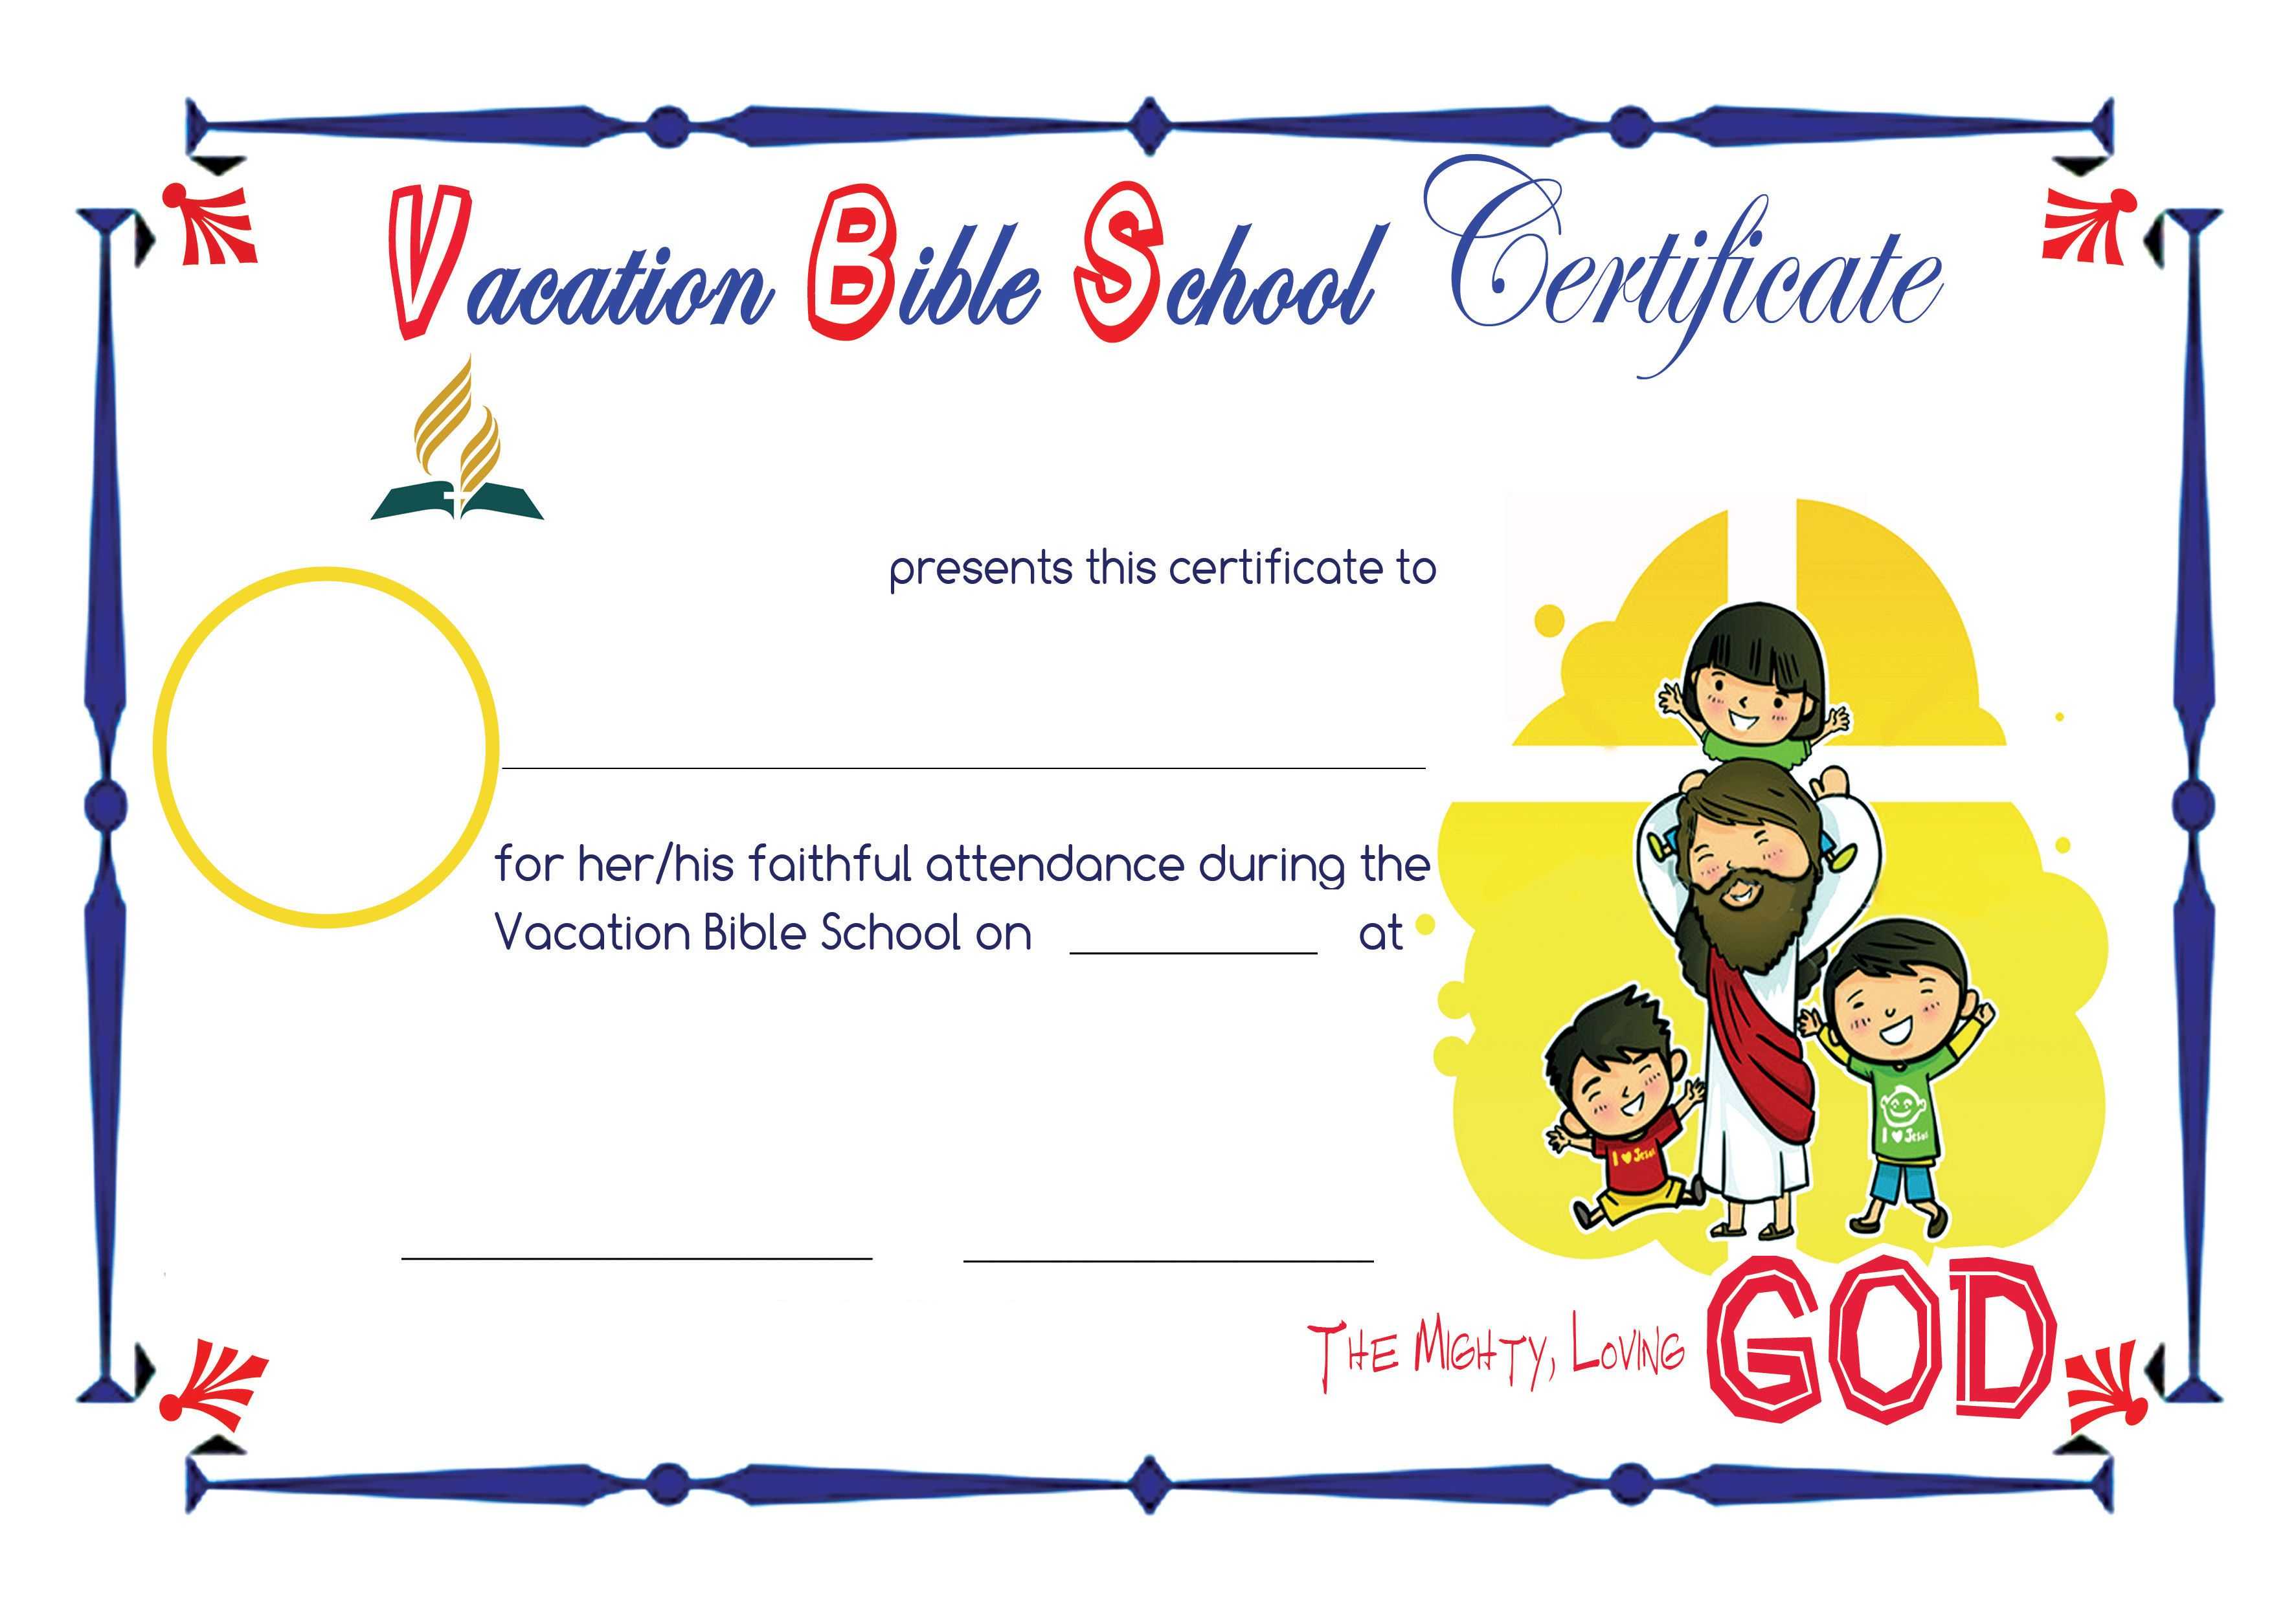 Bible School Certificates Pictures To Pin On Pinterest with Free Vbs